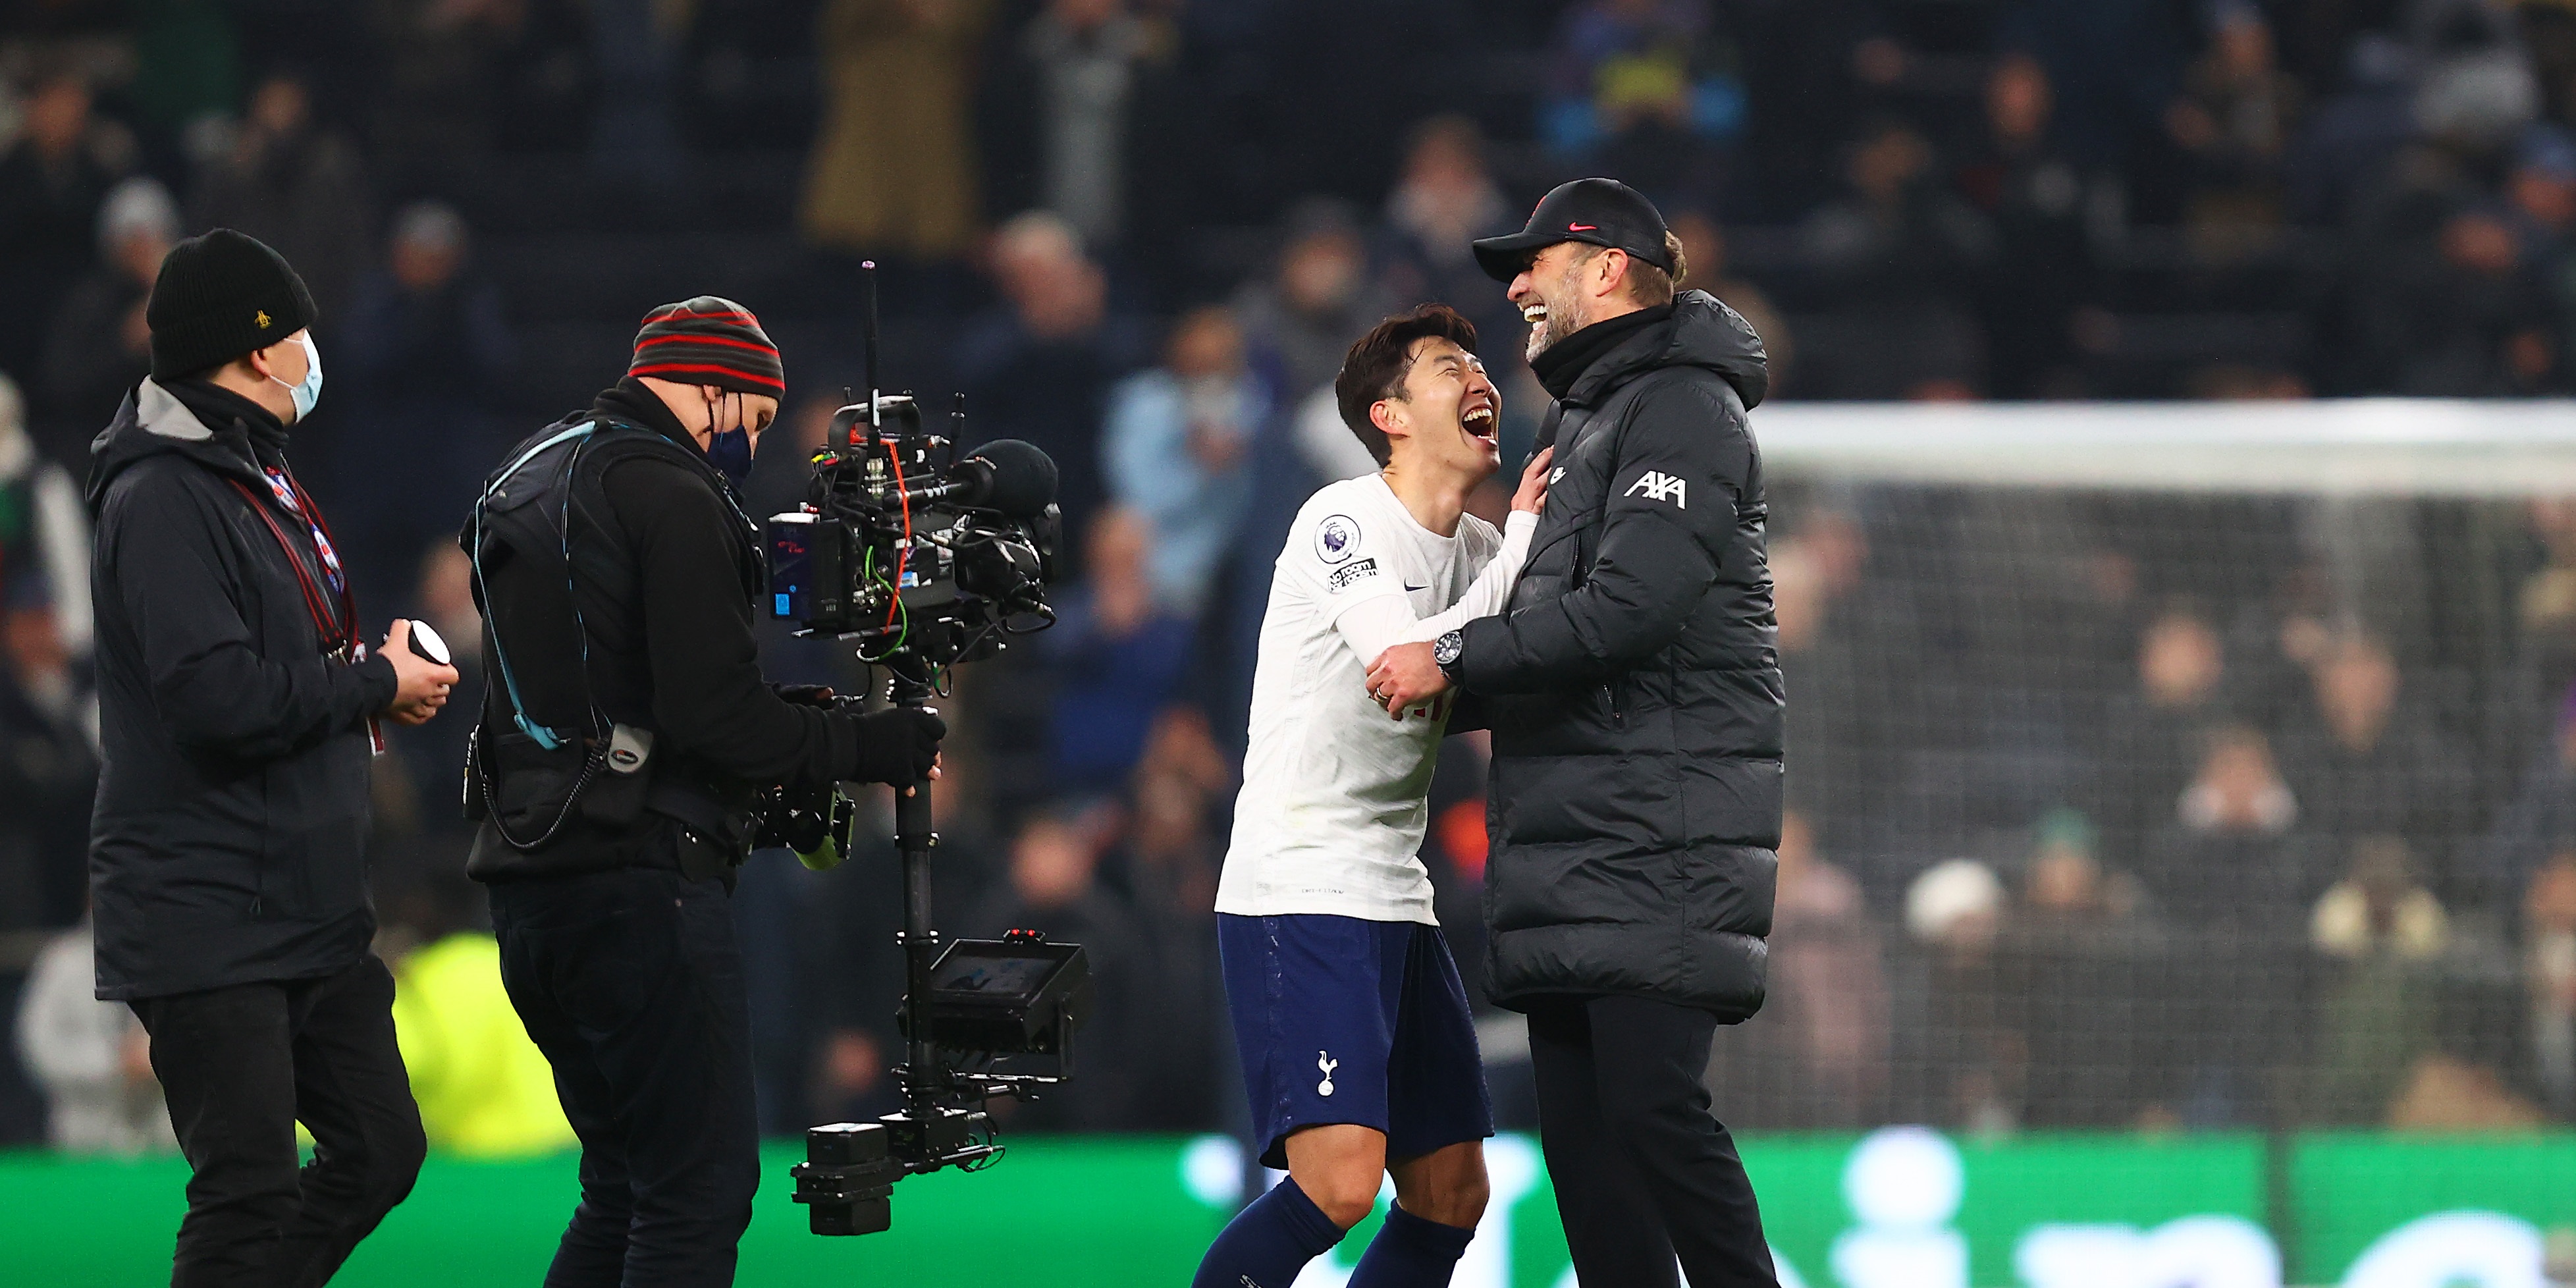 Son Heung-min’s father’s ‘top clubs’ comments fascinating in light of prior Liverpool links